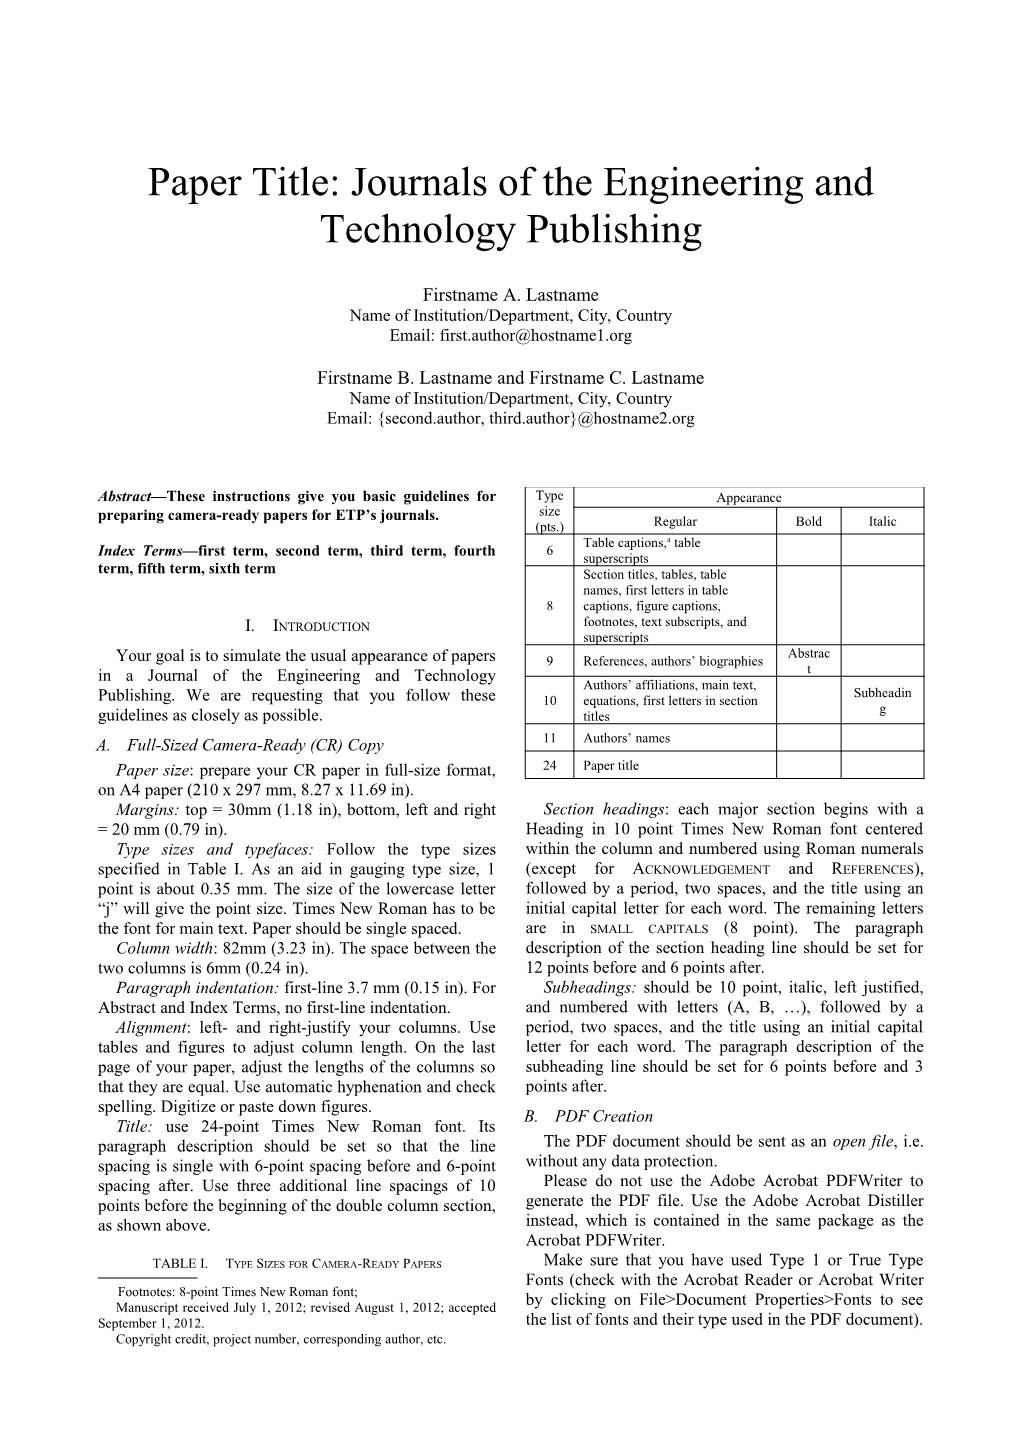 Paper Title: Journals of the Engineering and Technology Publishing